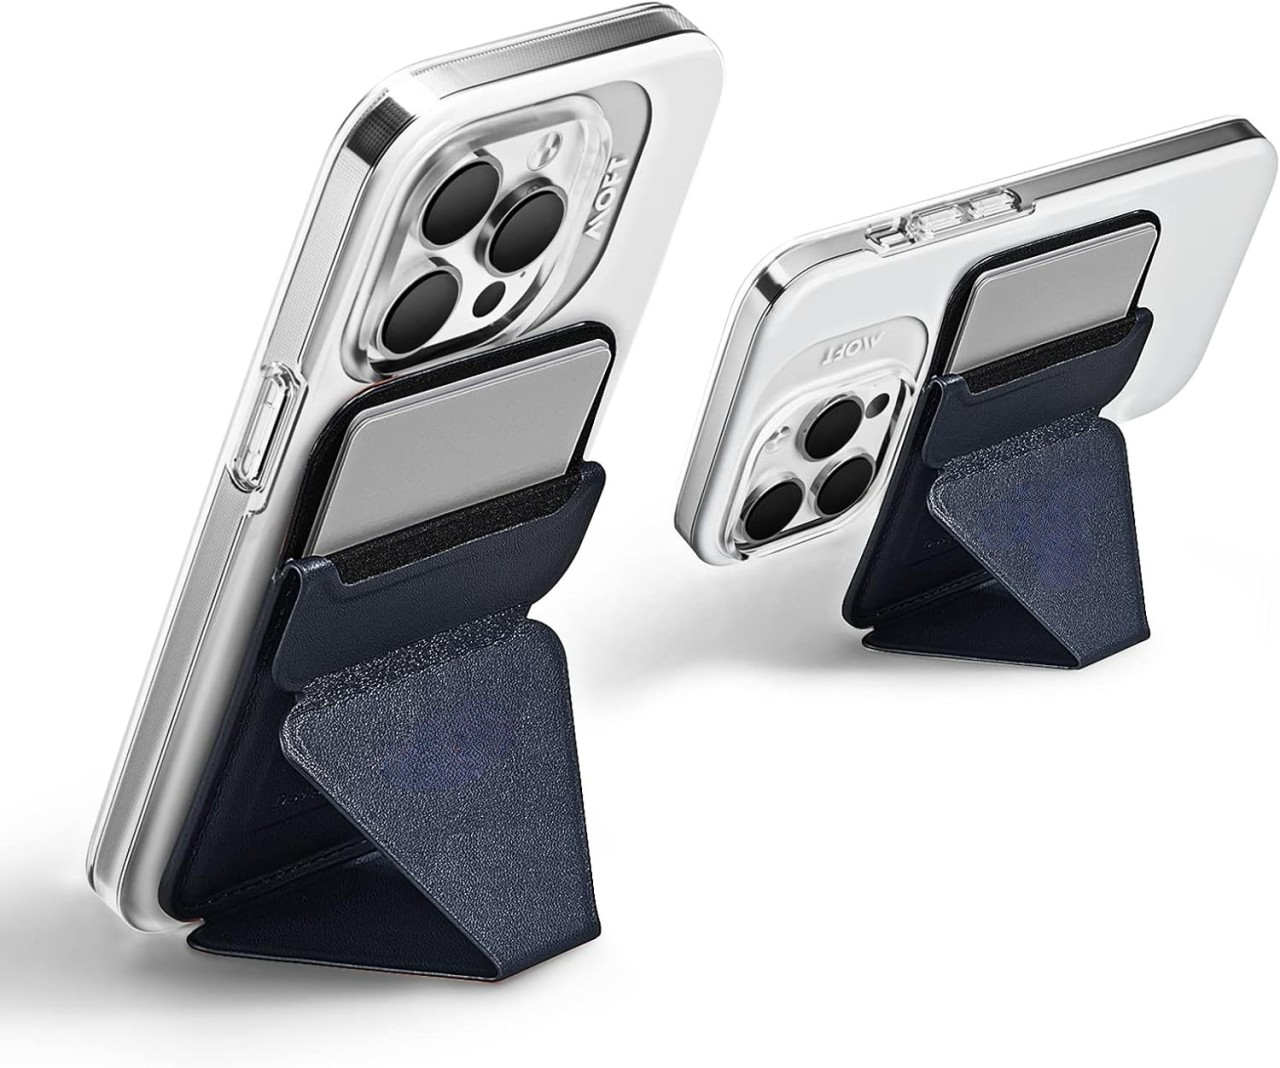 Folding iPhone Magnetic Wallet & Portable iPhone Stand 2 in 1 Card Holder - Blue